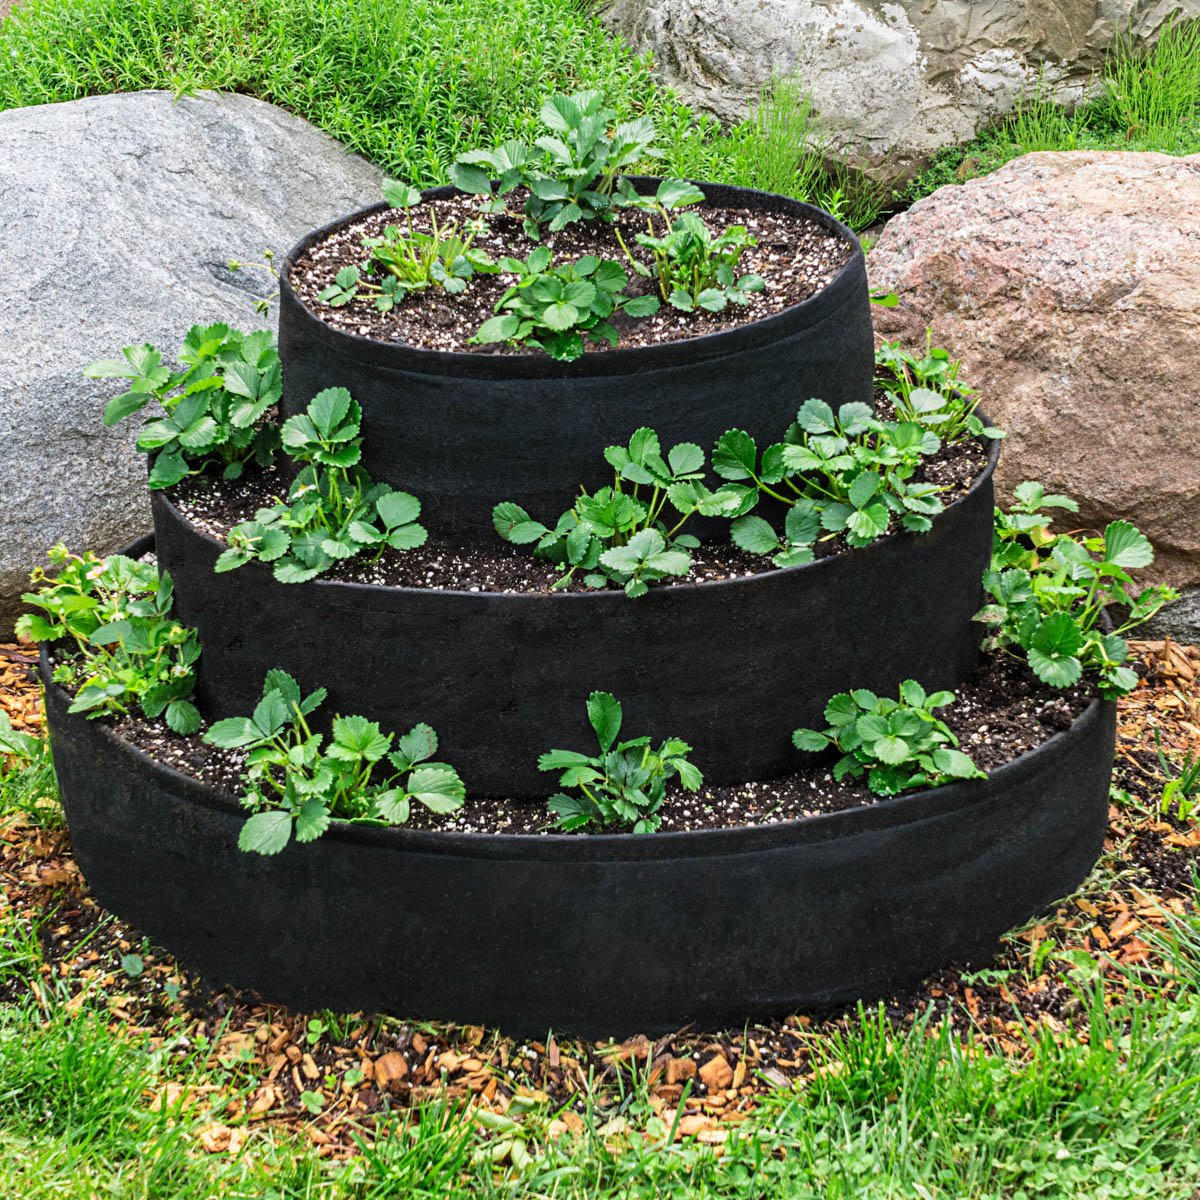 Gardens Alive! Geo-Textile Grow Tub 3-Tiered Strawberry Planter - Hold 25+ Plants - 24 In tall x 36 In Diameter - image 1 of 3